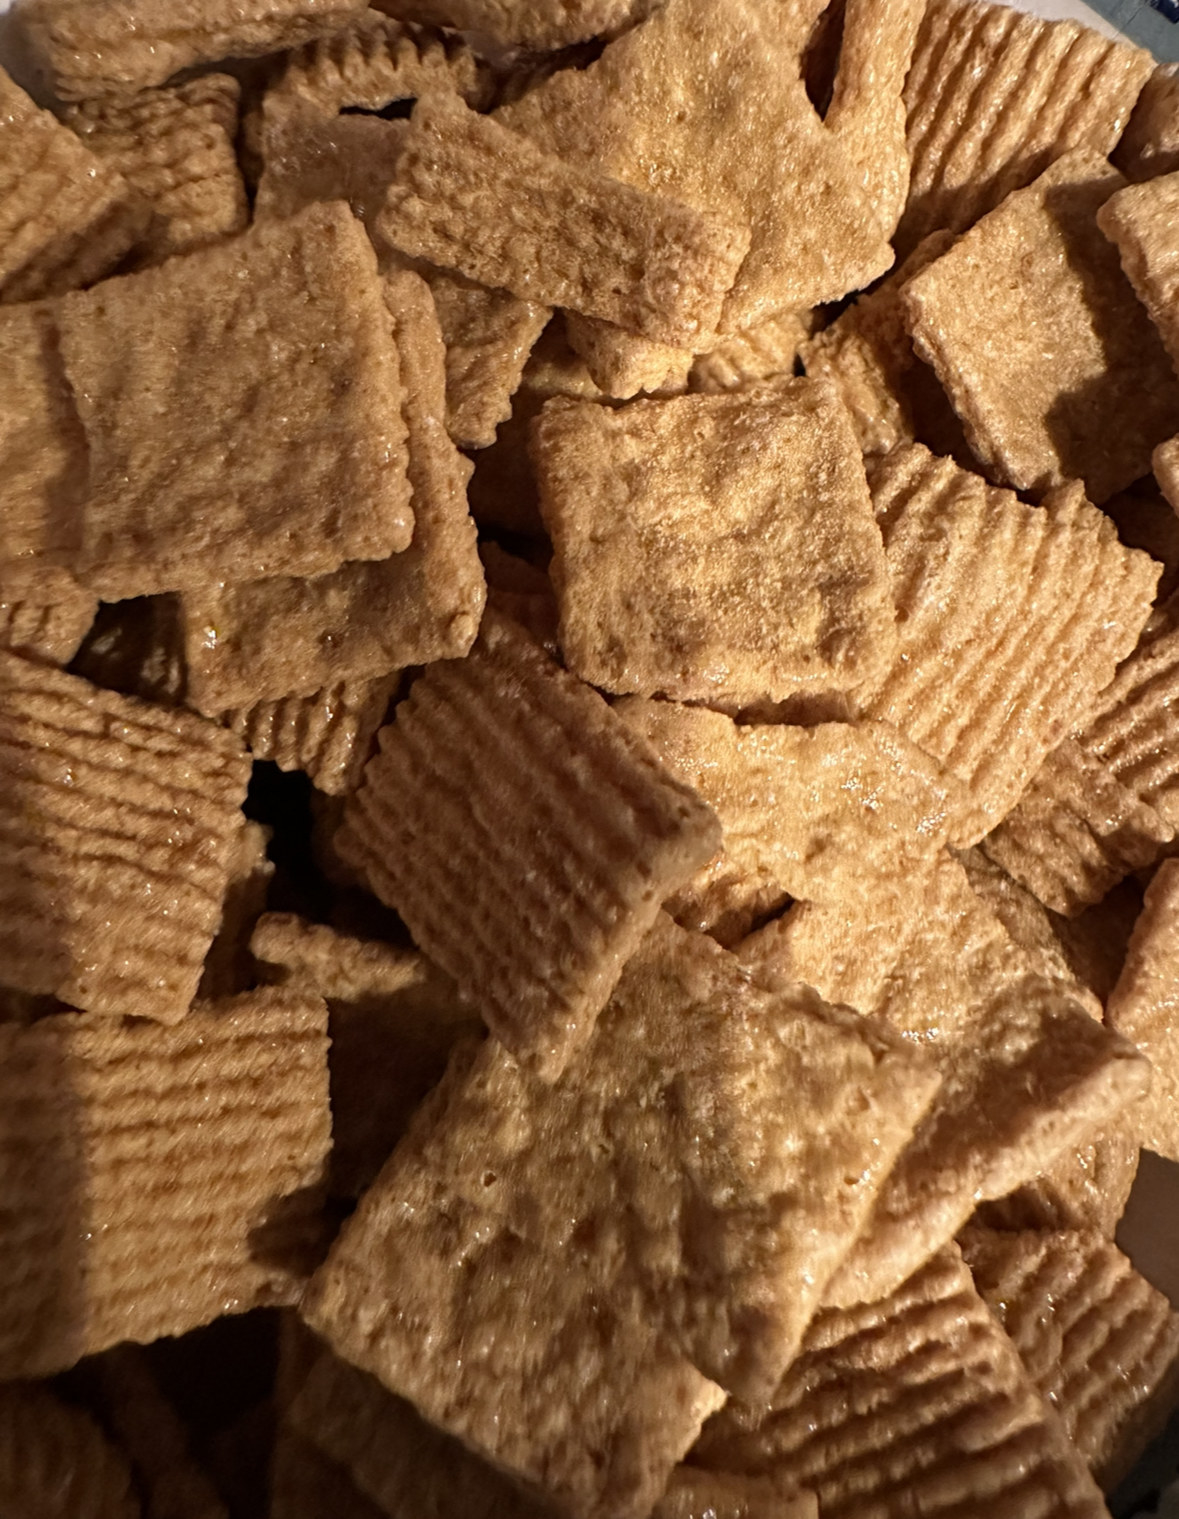 Close-up of the Golden Grahams cereal